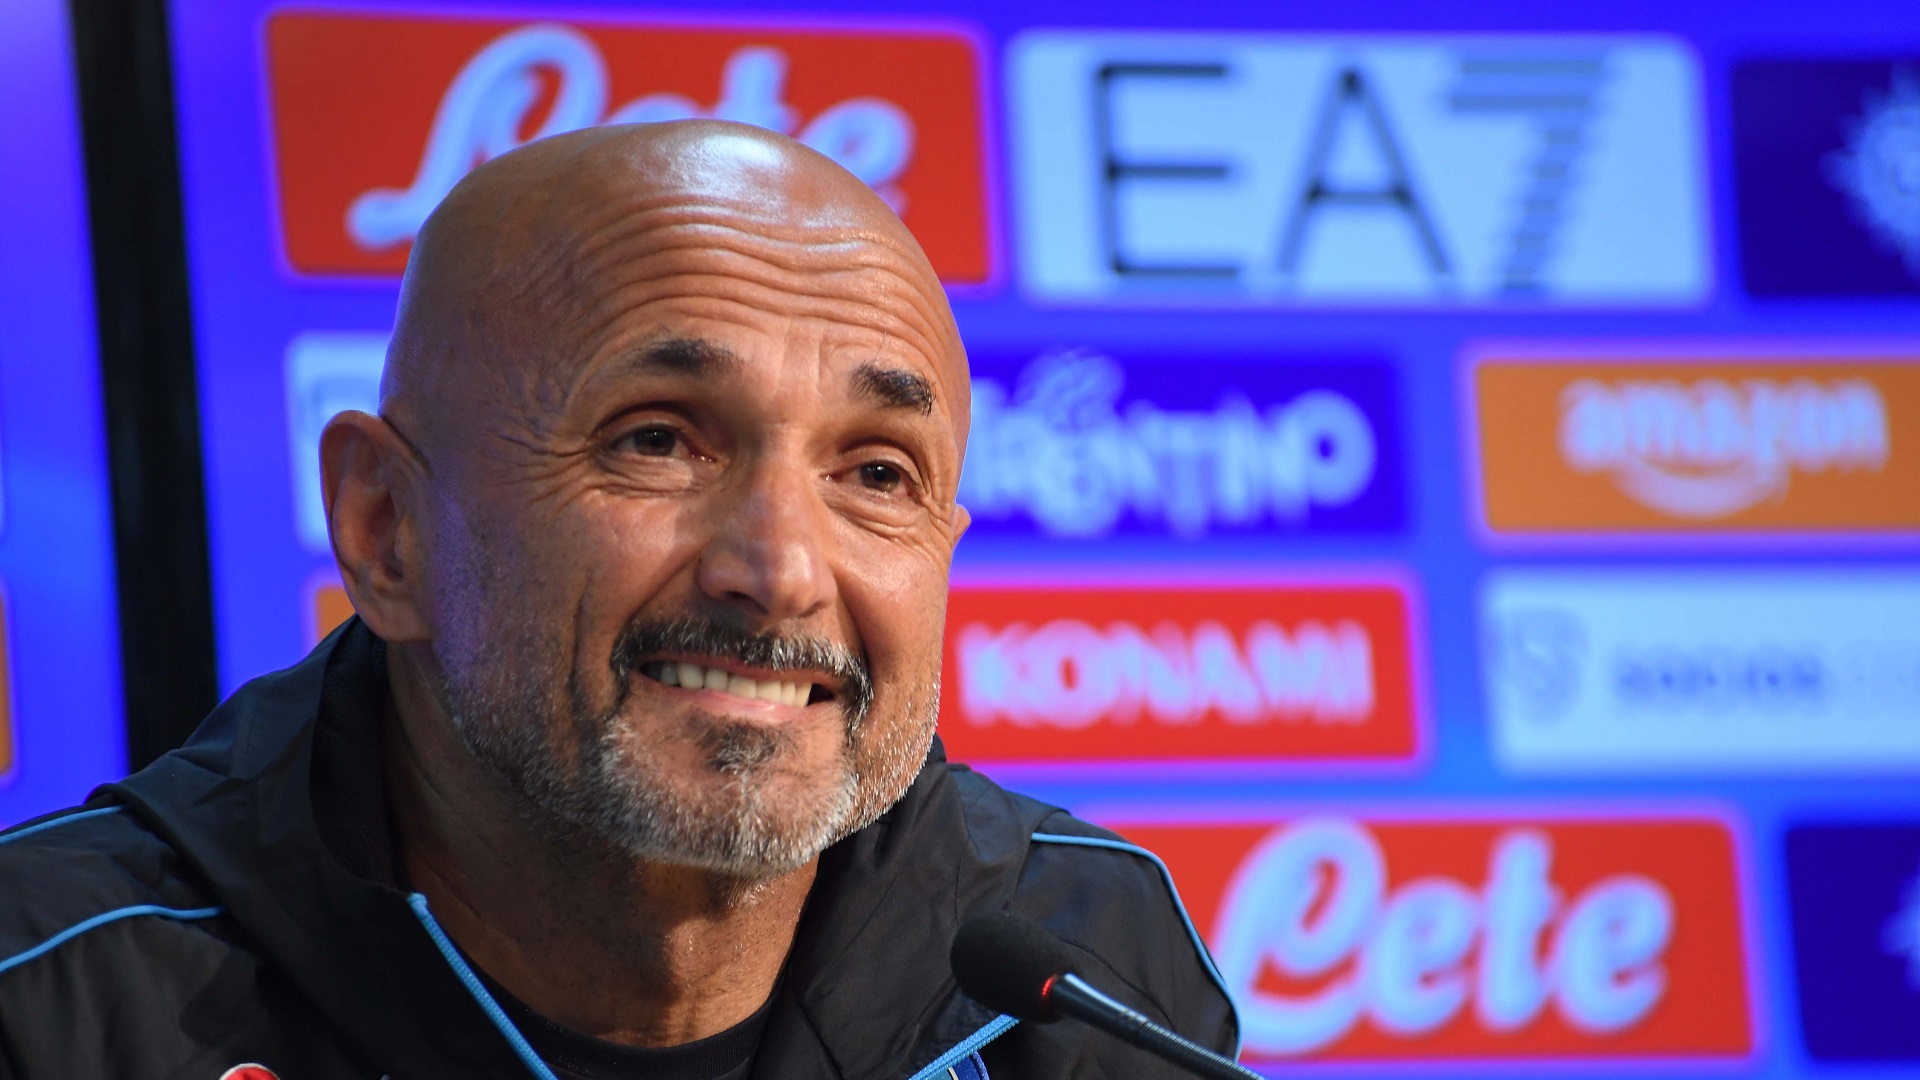 While Spalletti was roused by Frattesi’s match-winning brace against Ukraine, he wasn’t the least bit impressed by the midfielder’s comments post game.